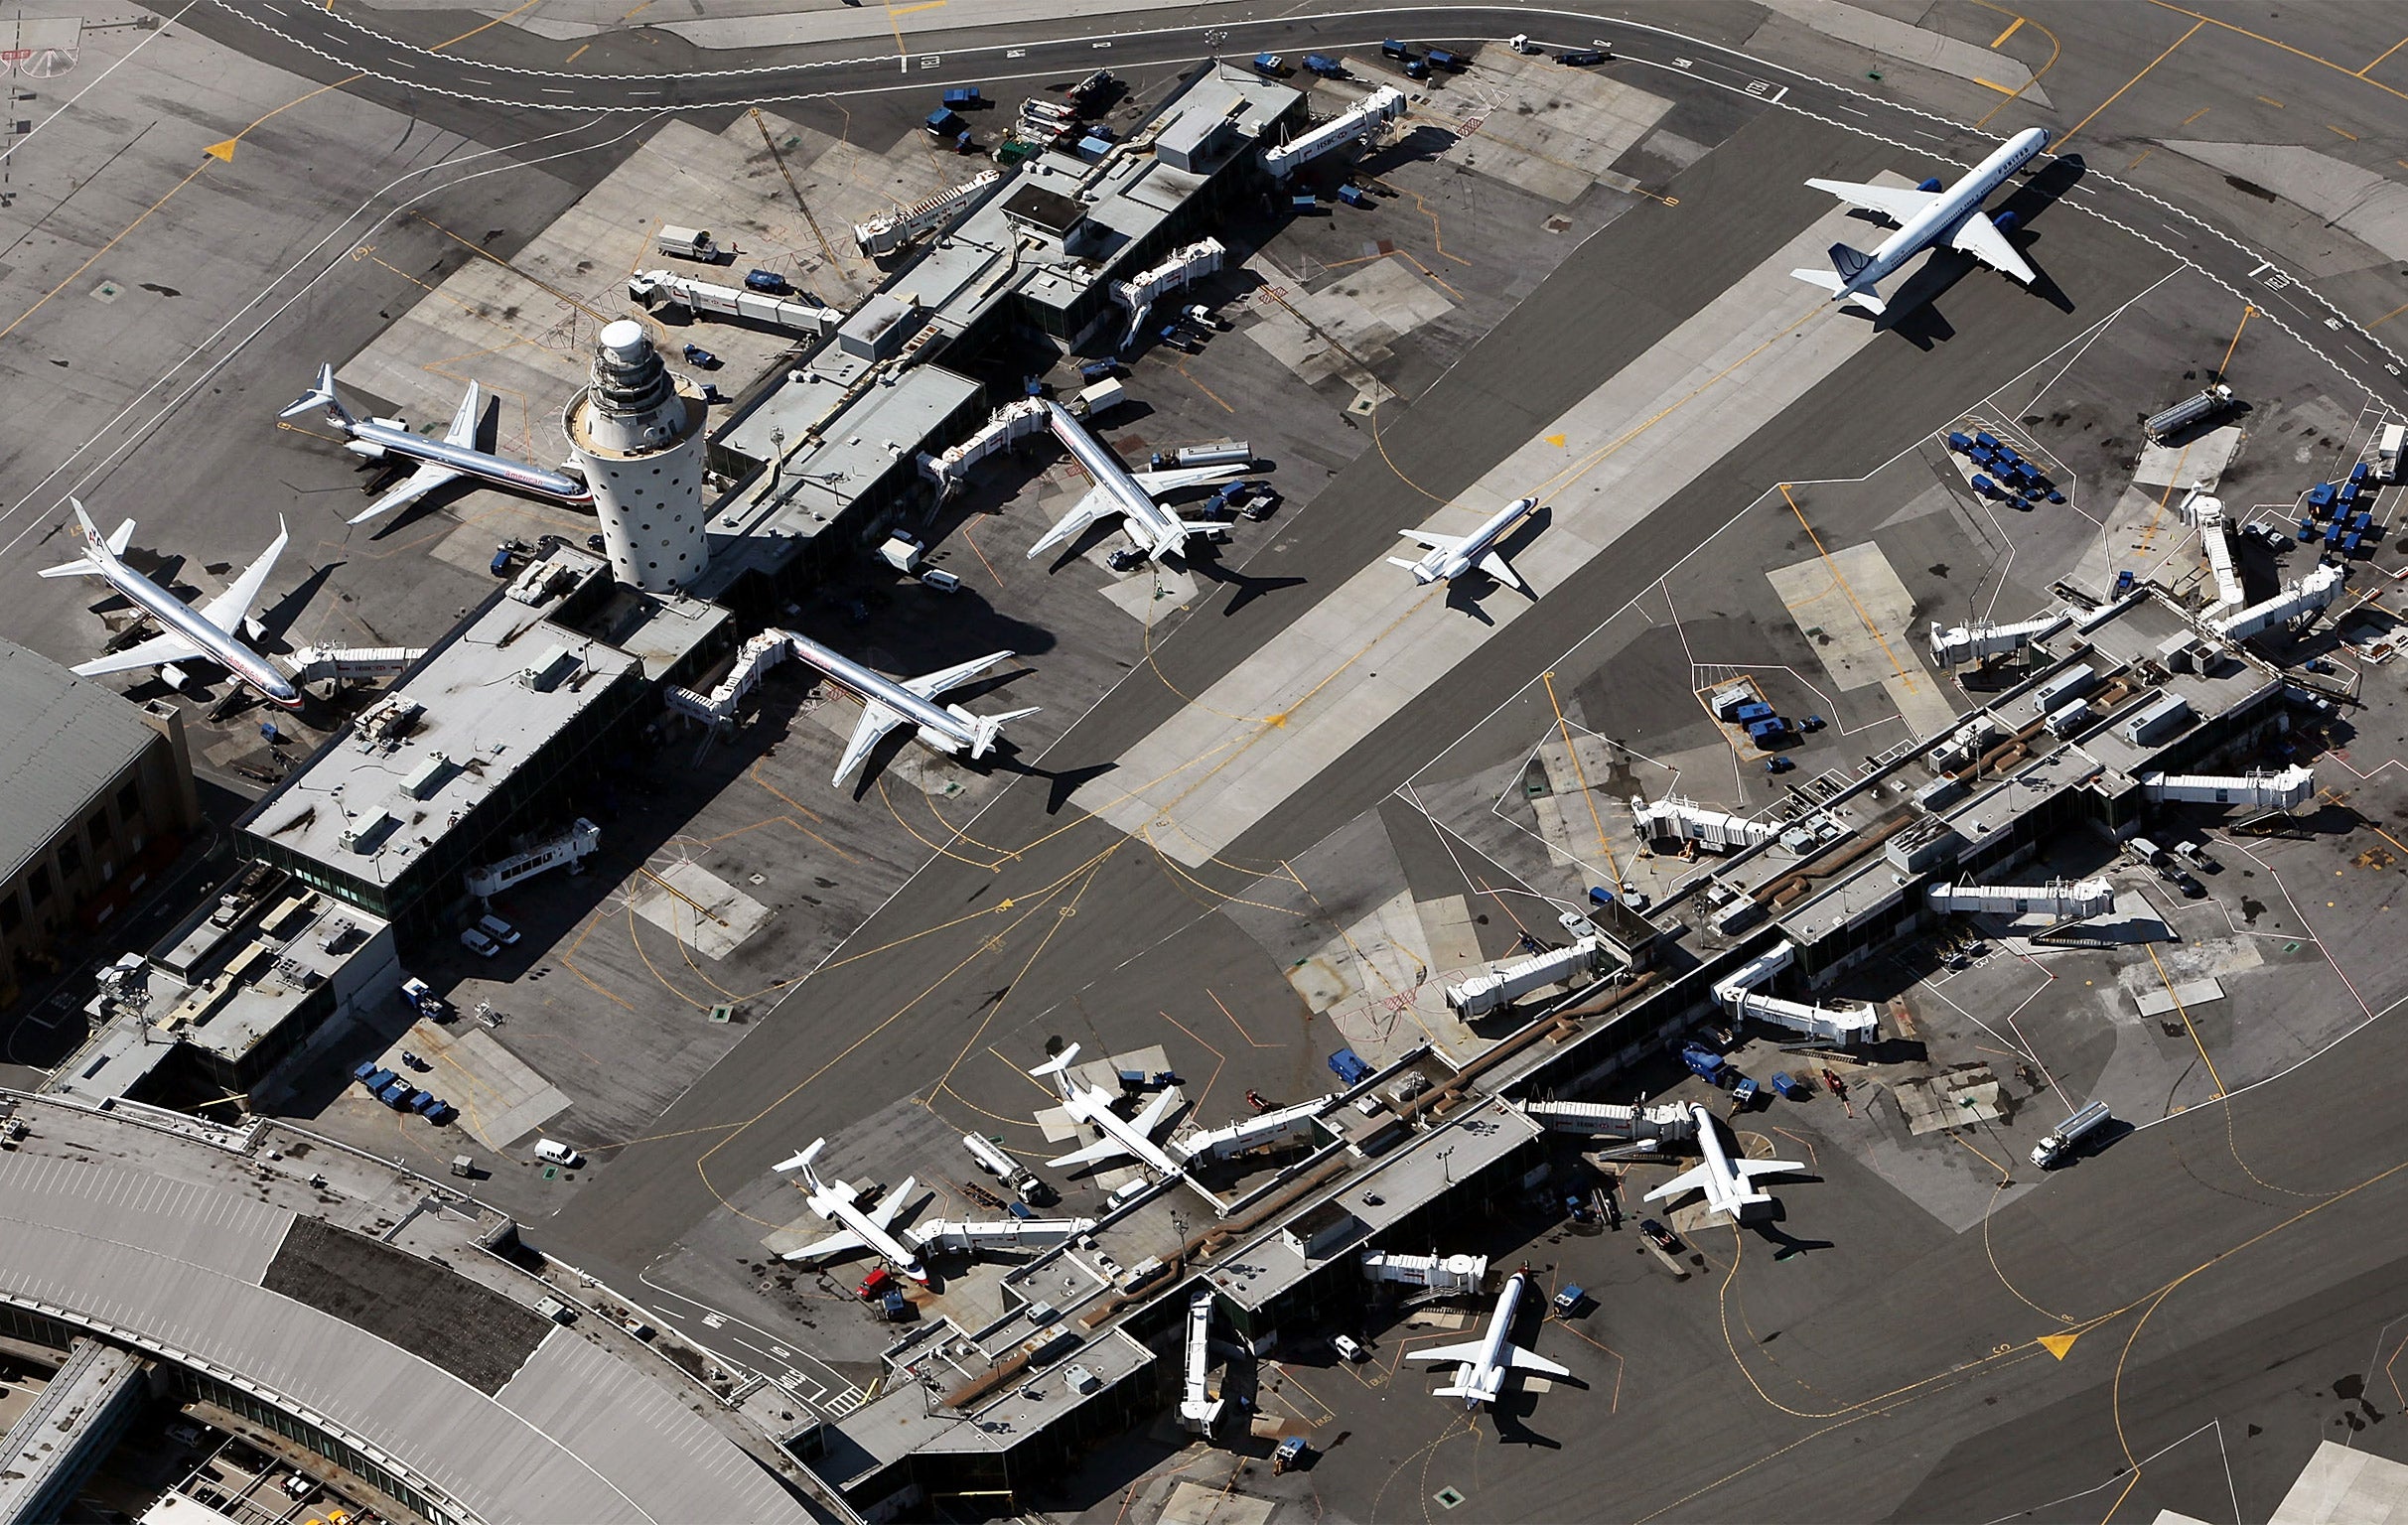 An aerial view of LaGuardia airport, which New York Governor Mario Cuomo has said will be rebuilt from scratch by 2021